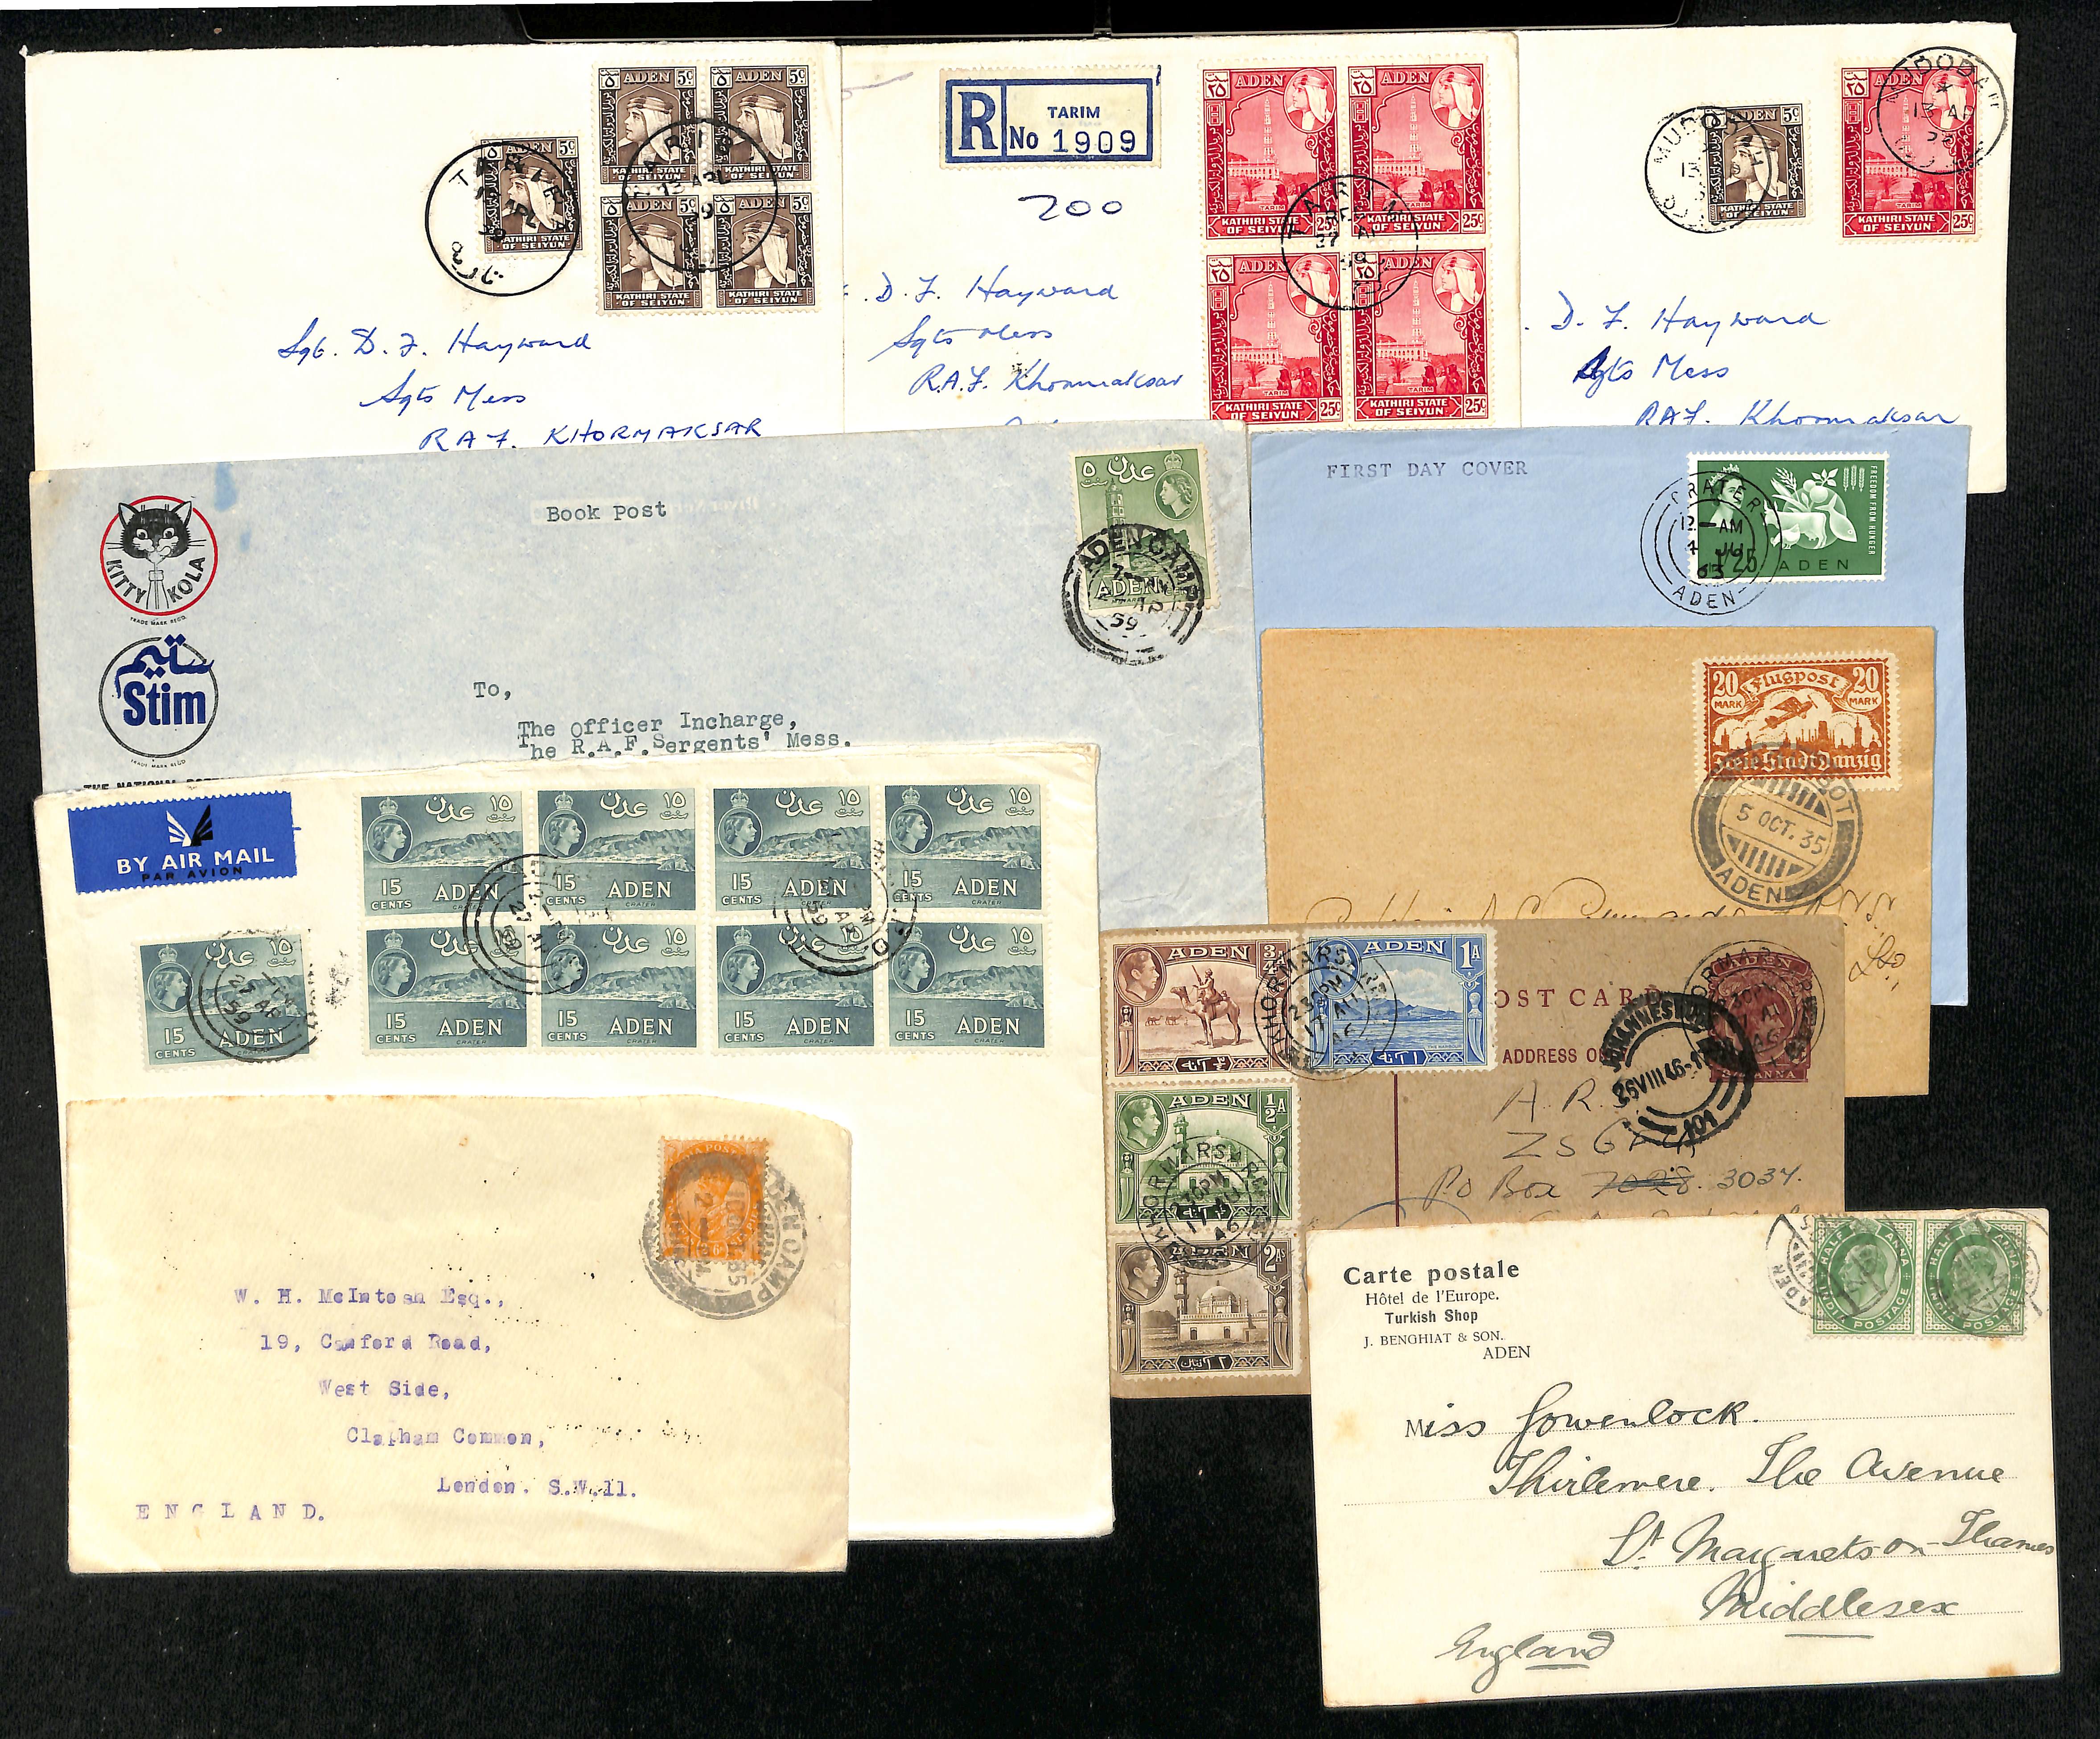 1905-63 Covers and cards including 1955-59 covers with Aden stamps cancelled at Maalla, Skeikh- - Image 2 of 5